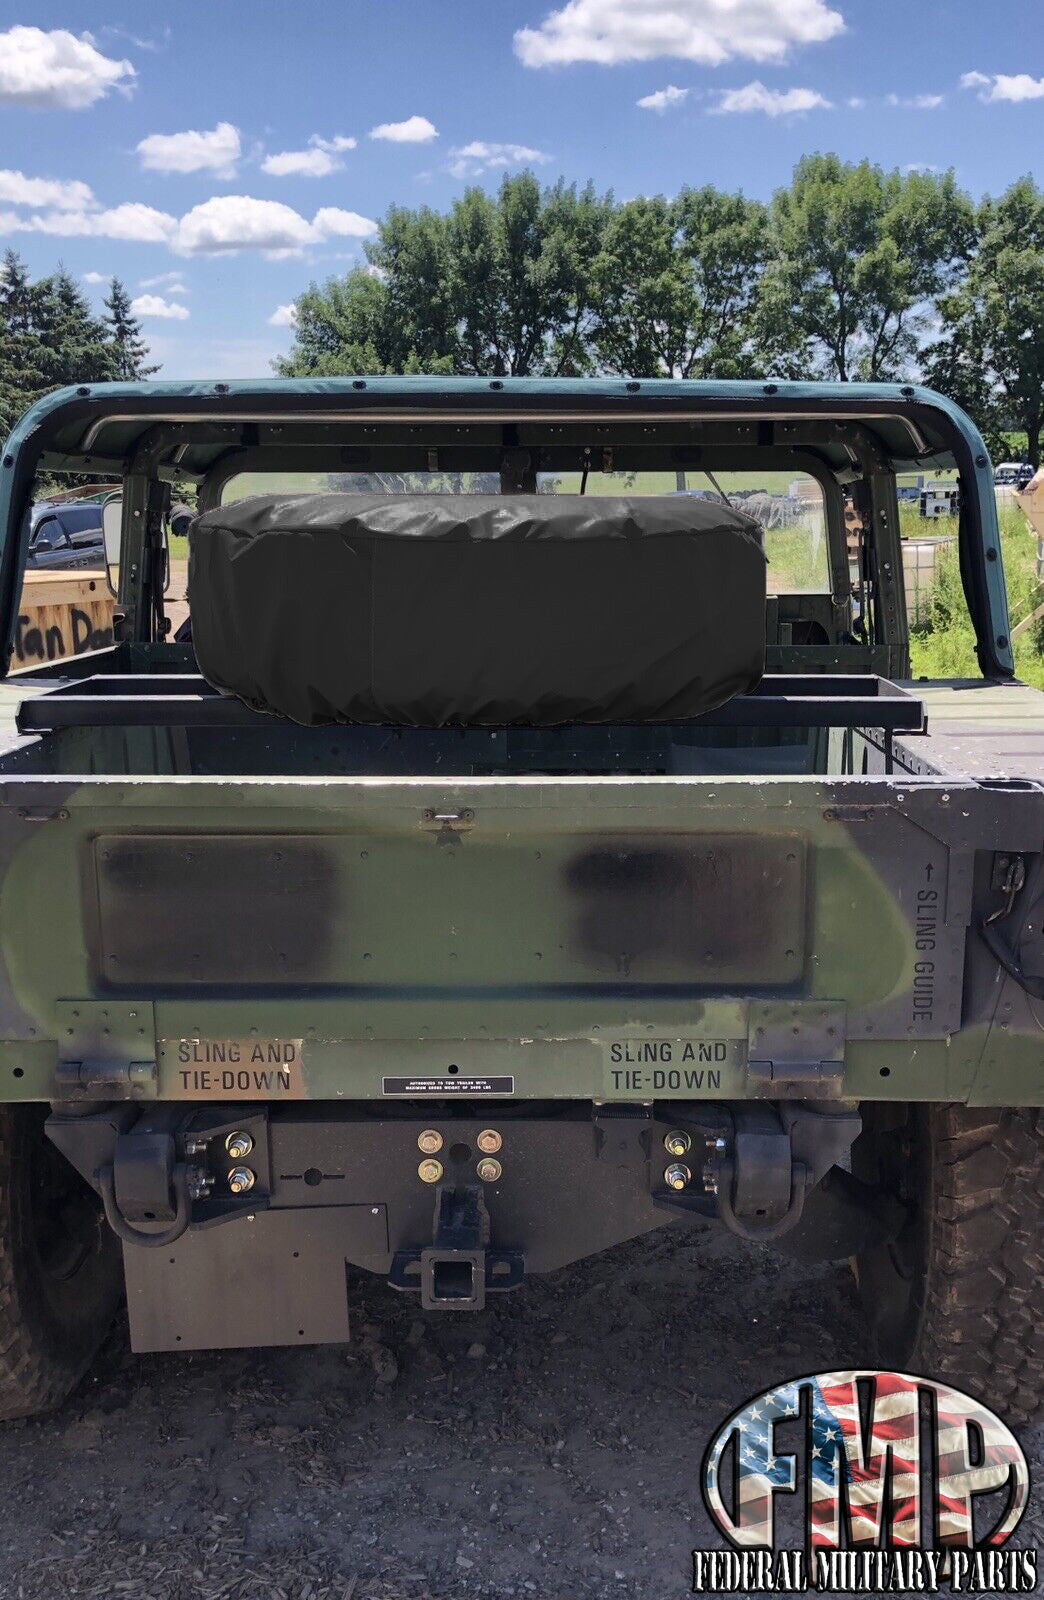 Canvas Spare Tire Cover For 37” TIRES - MILITARY HUMVEE SPARE TIRE COVER M998 CARRIER. AVAILABLE IN BLACK, TAN OR GREEN. Condition is New.